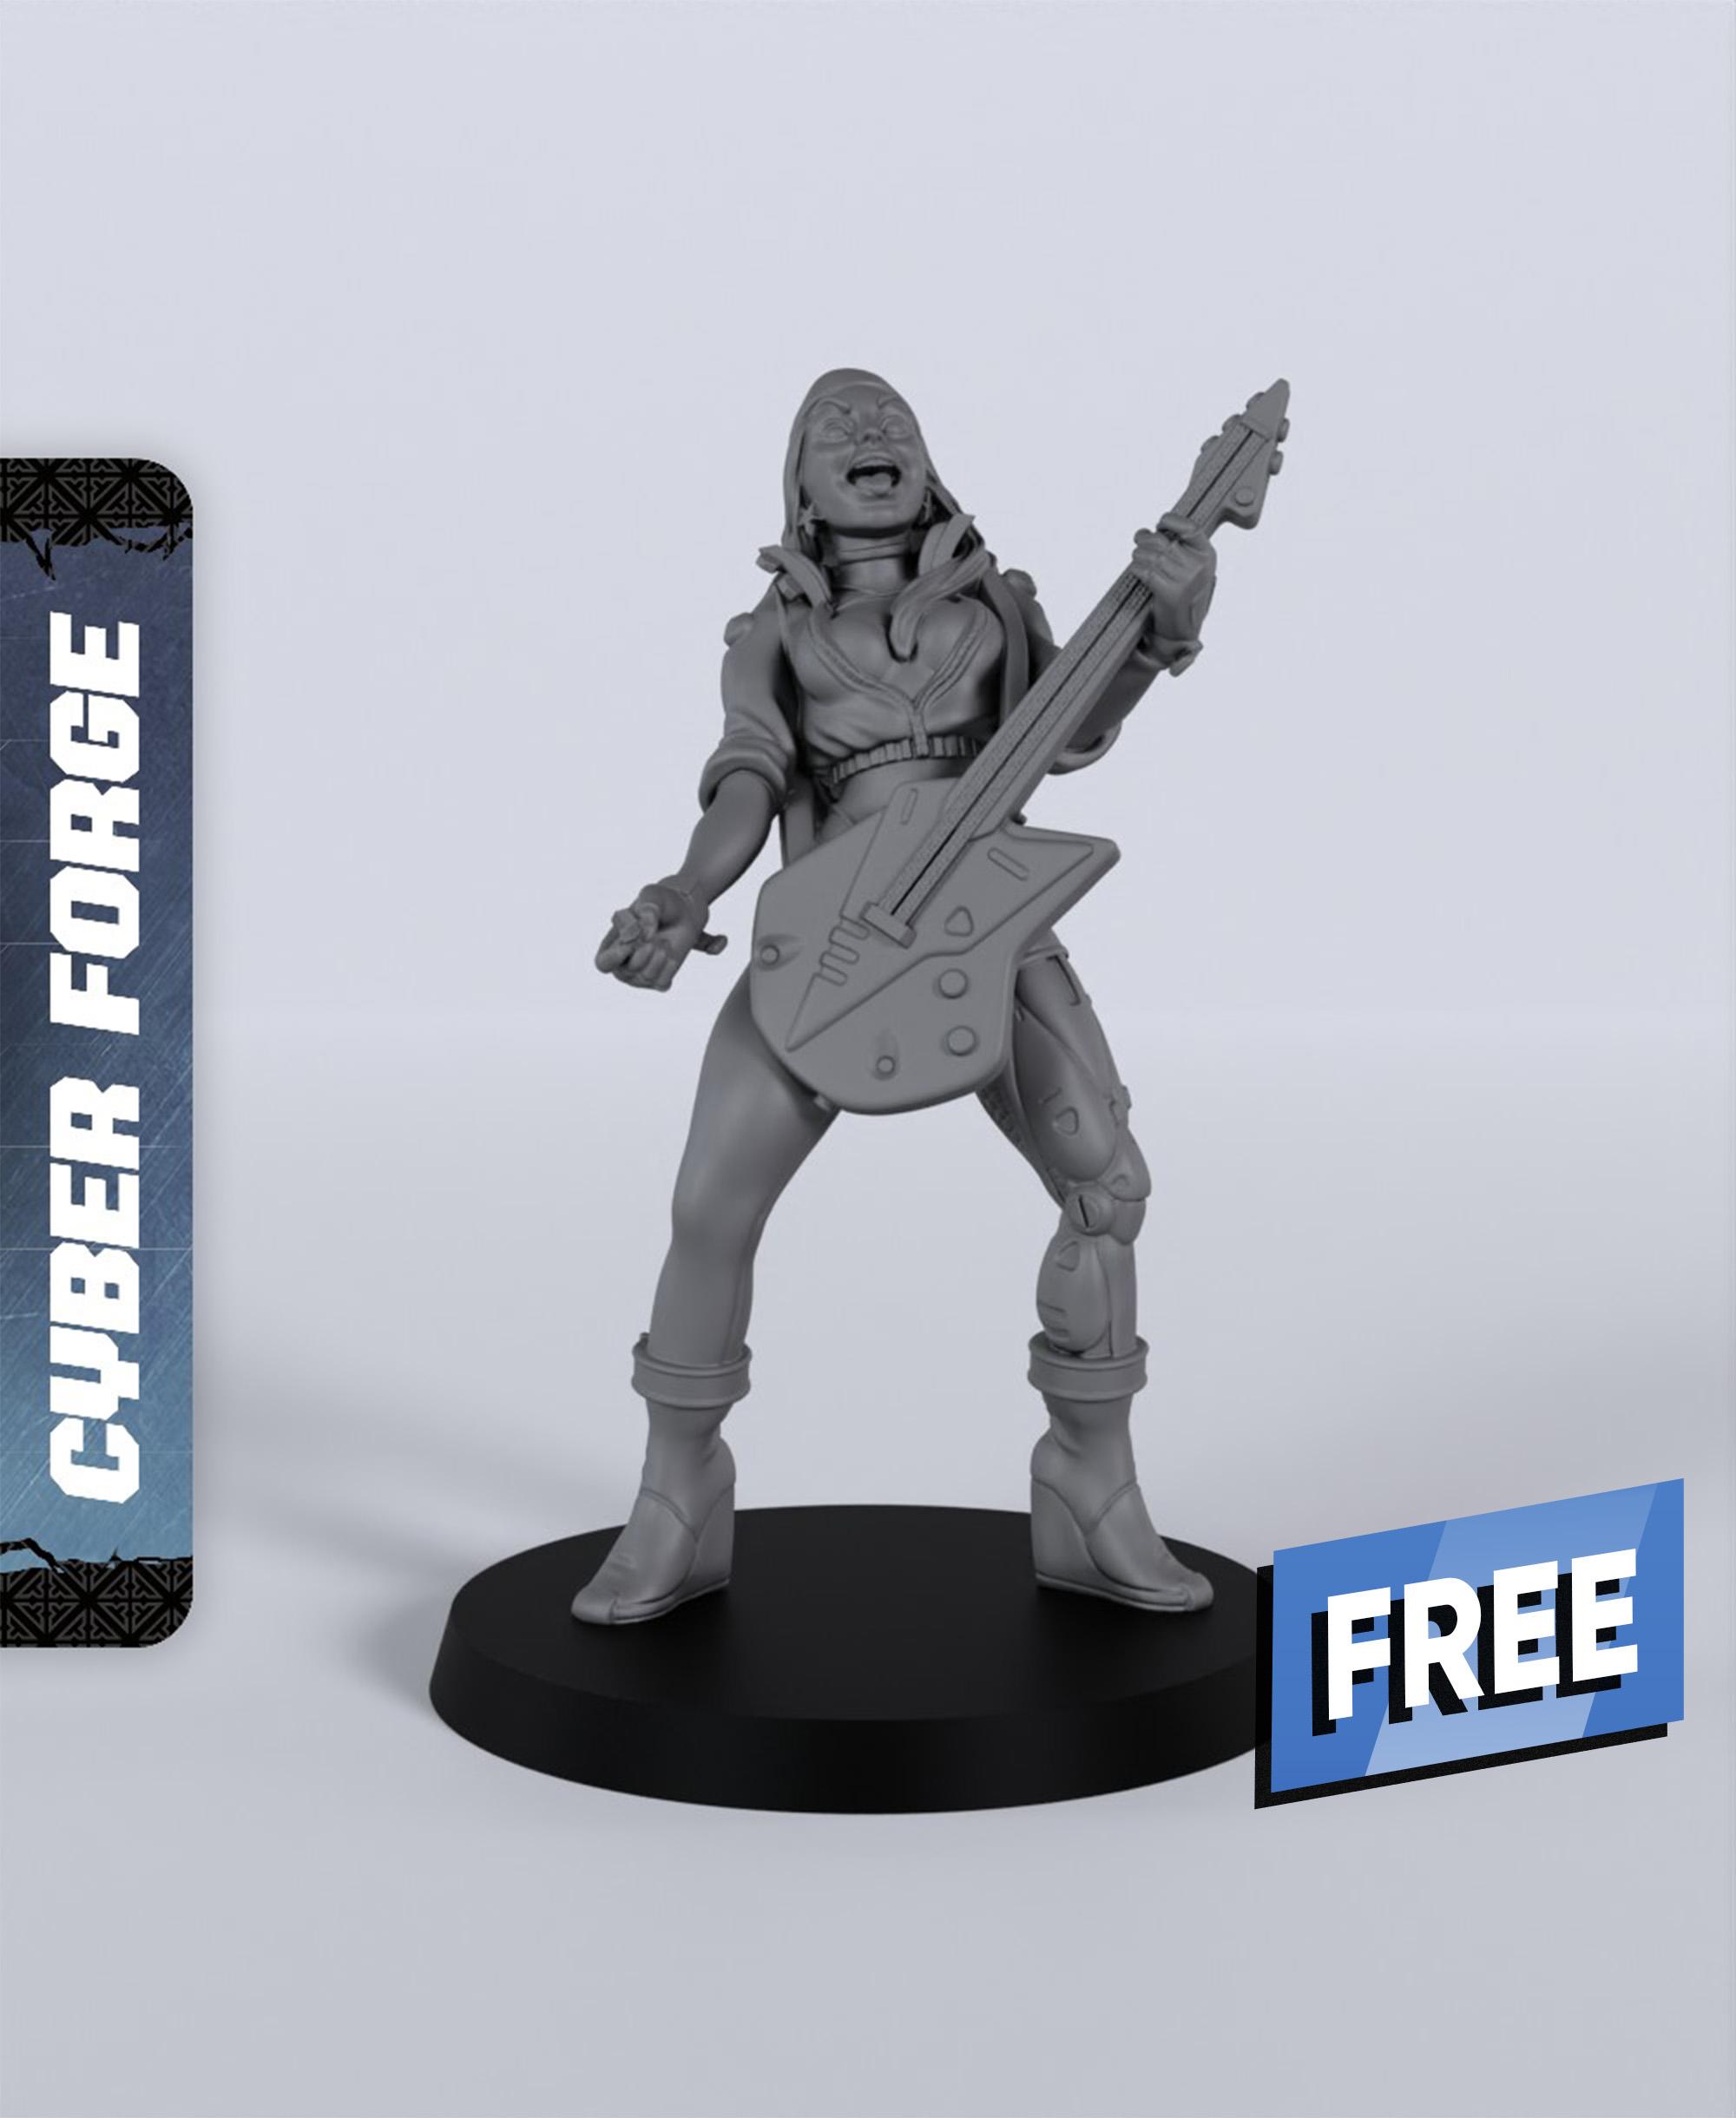 Jenny Silverleg - With Free Dragon Warhammer - 5e DnD Inspired for RPG and Wargamers 3d model